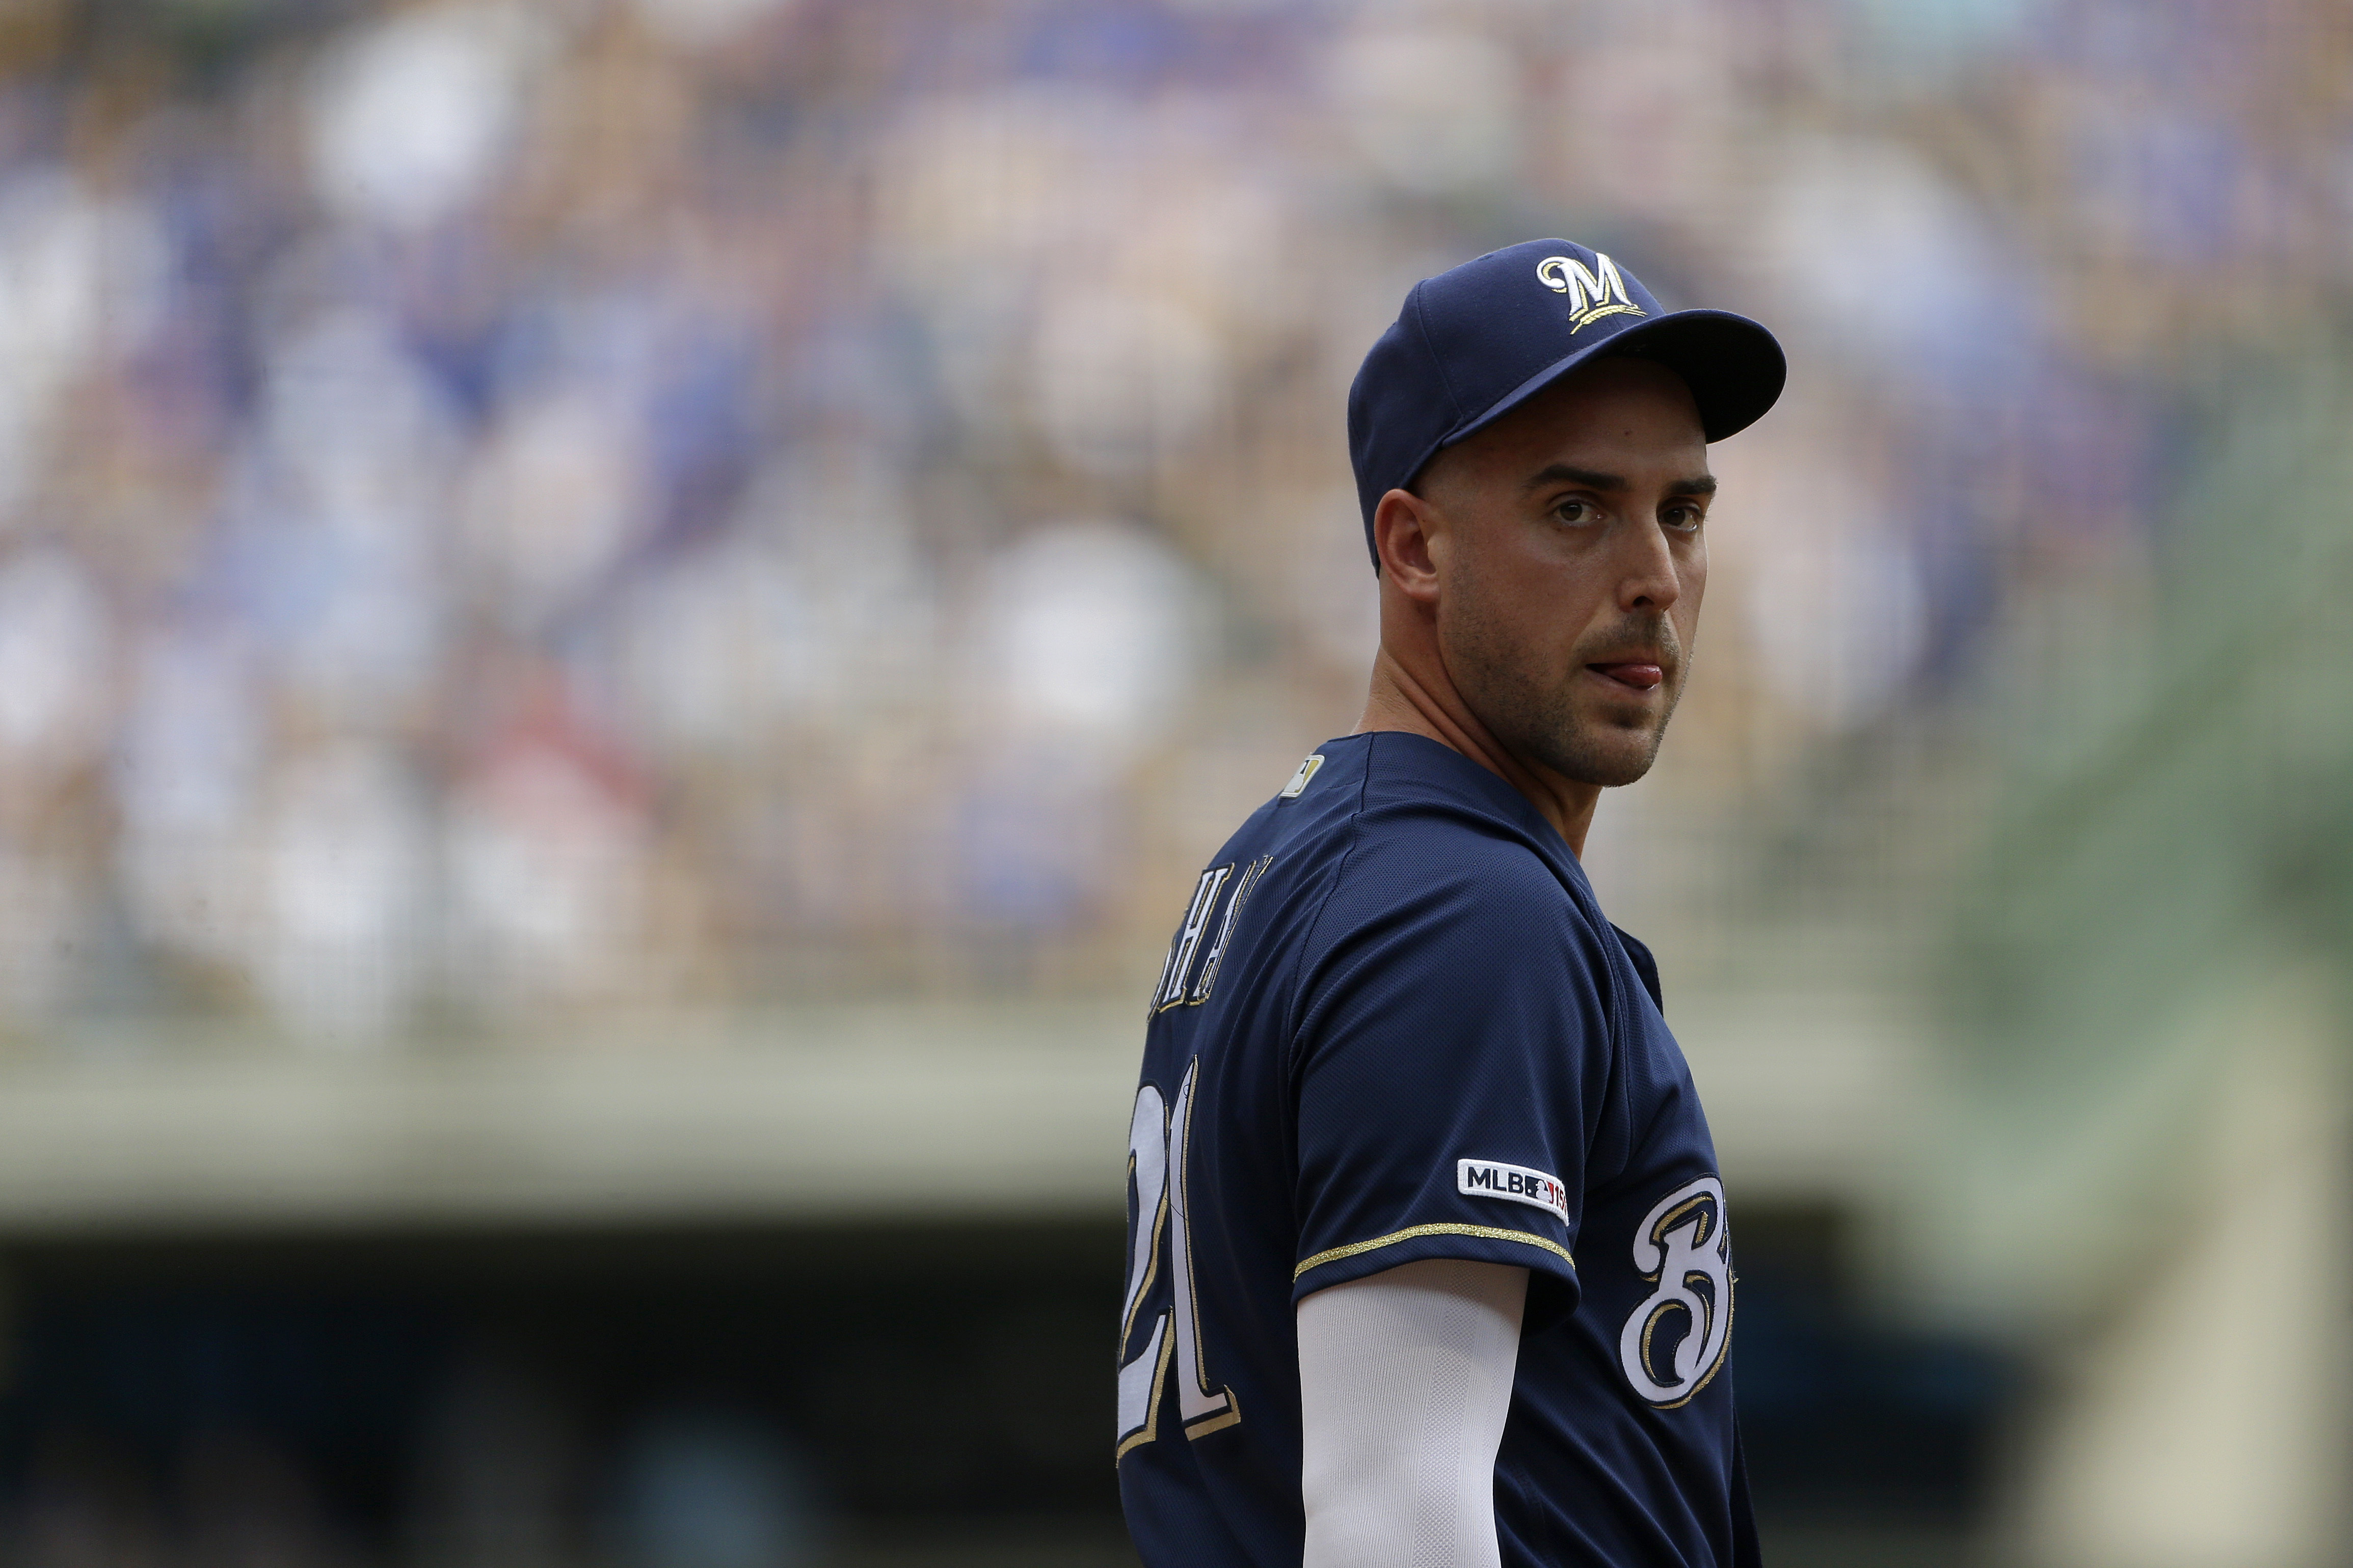 Boston Red Sox claim Travis Shaw off waivers from Brewers, add him